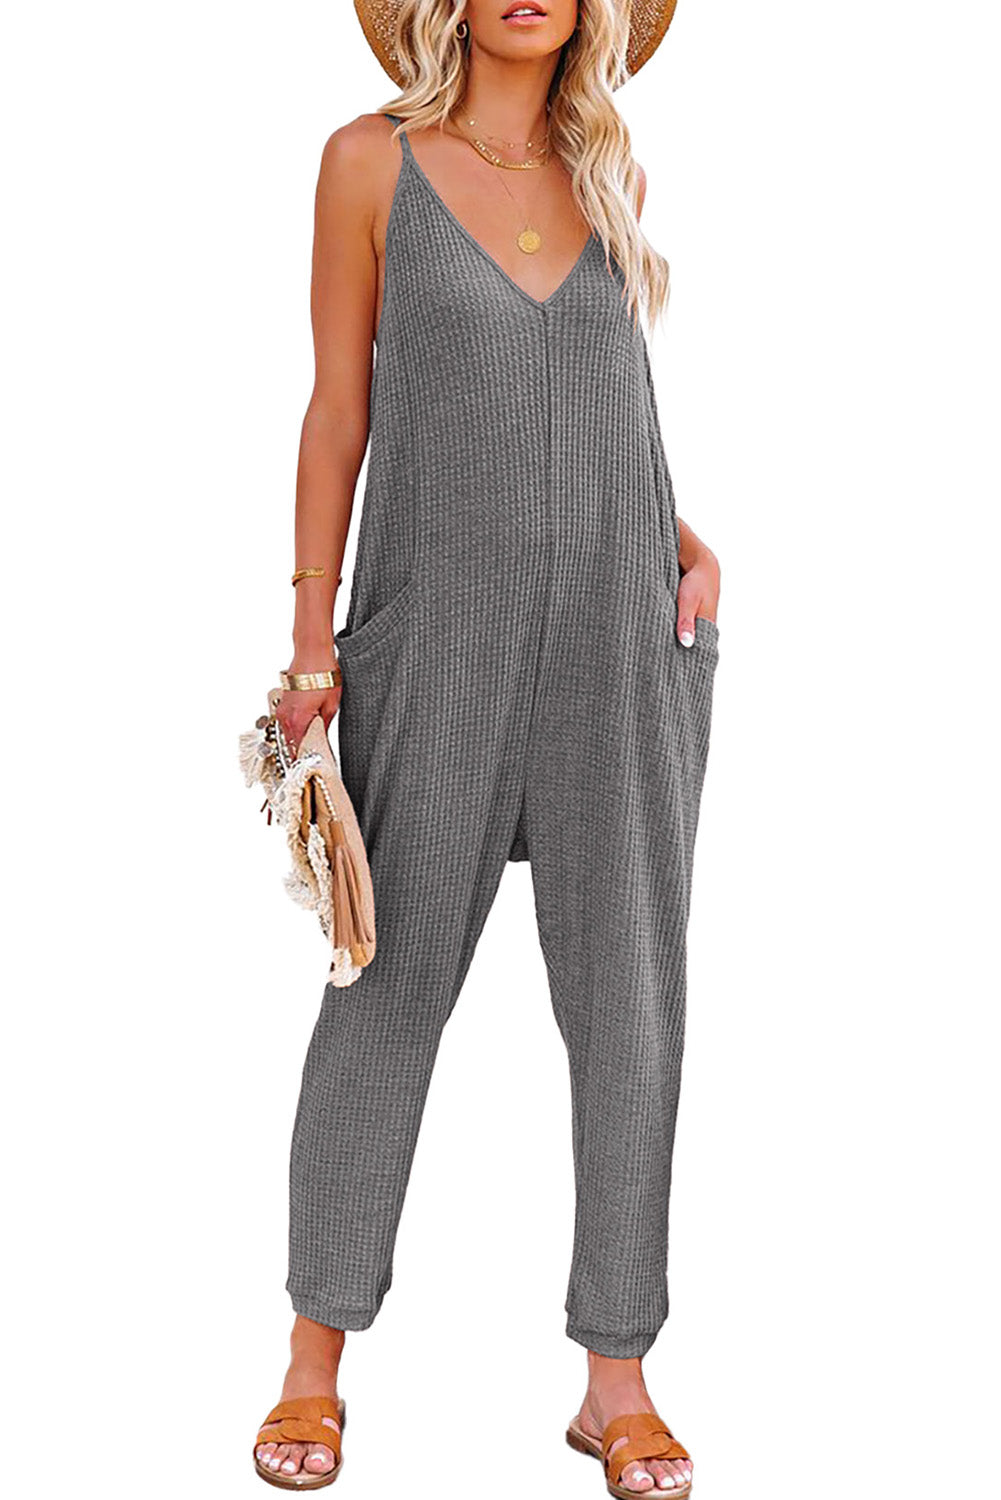 Black Textured Sleeveless V-Neck Pocketed Casual Jumpsuit